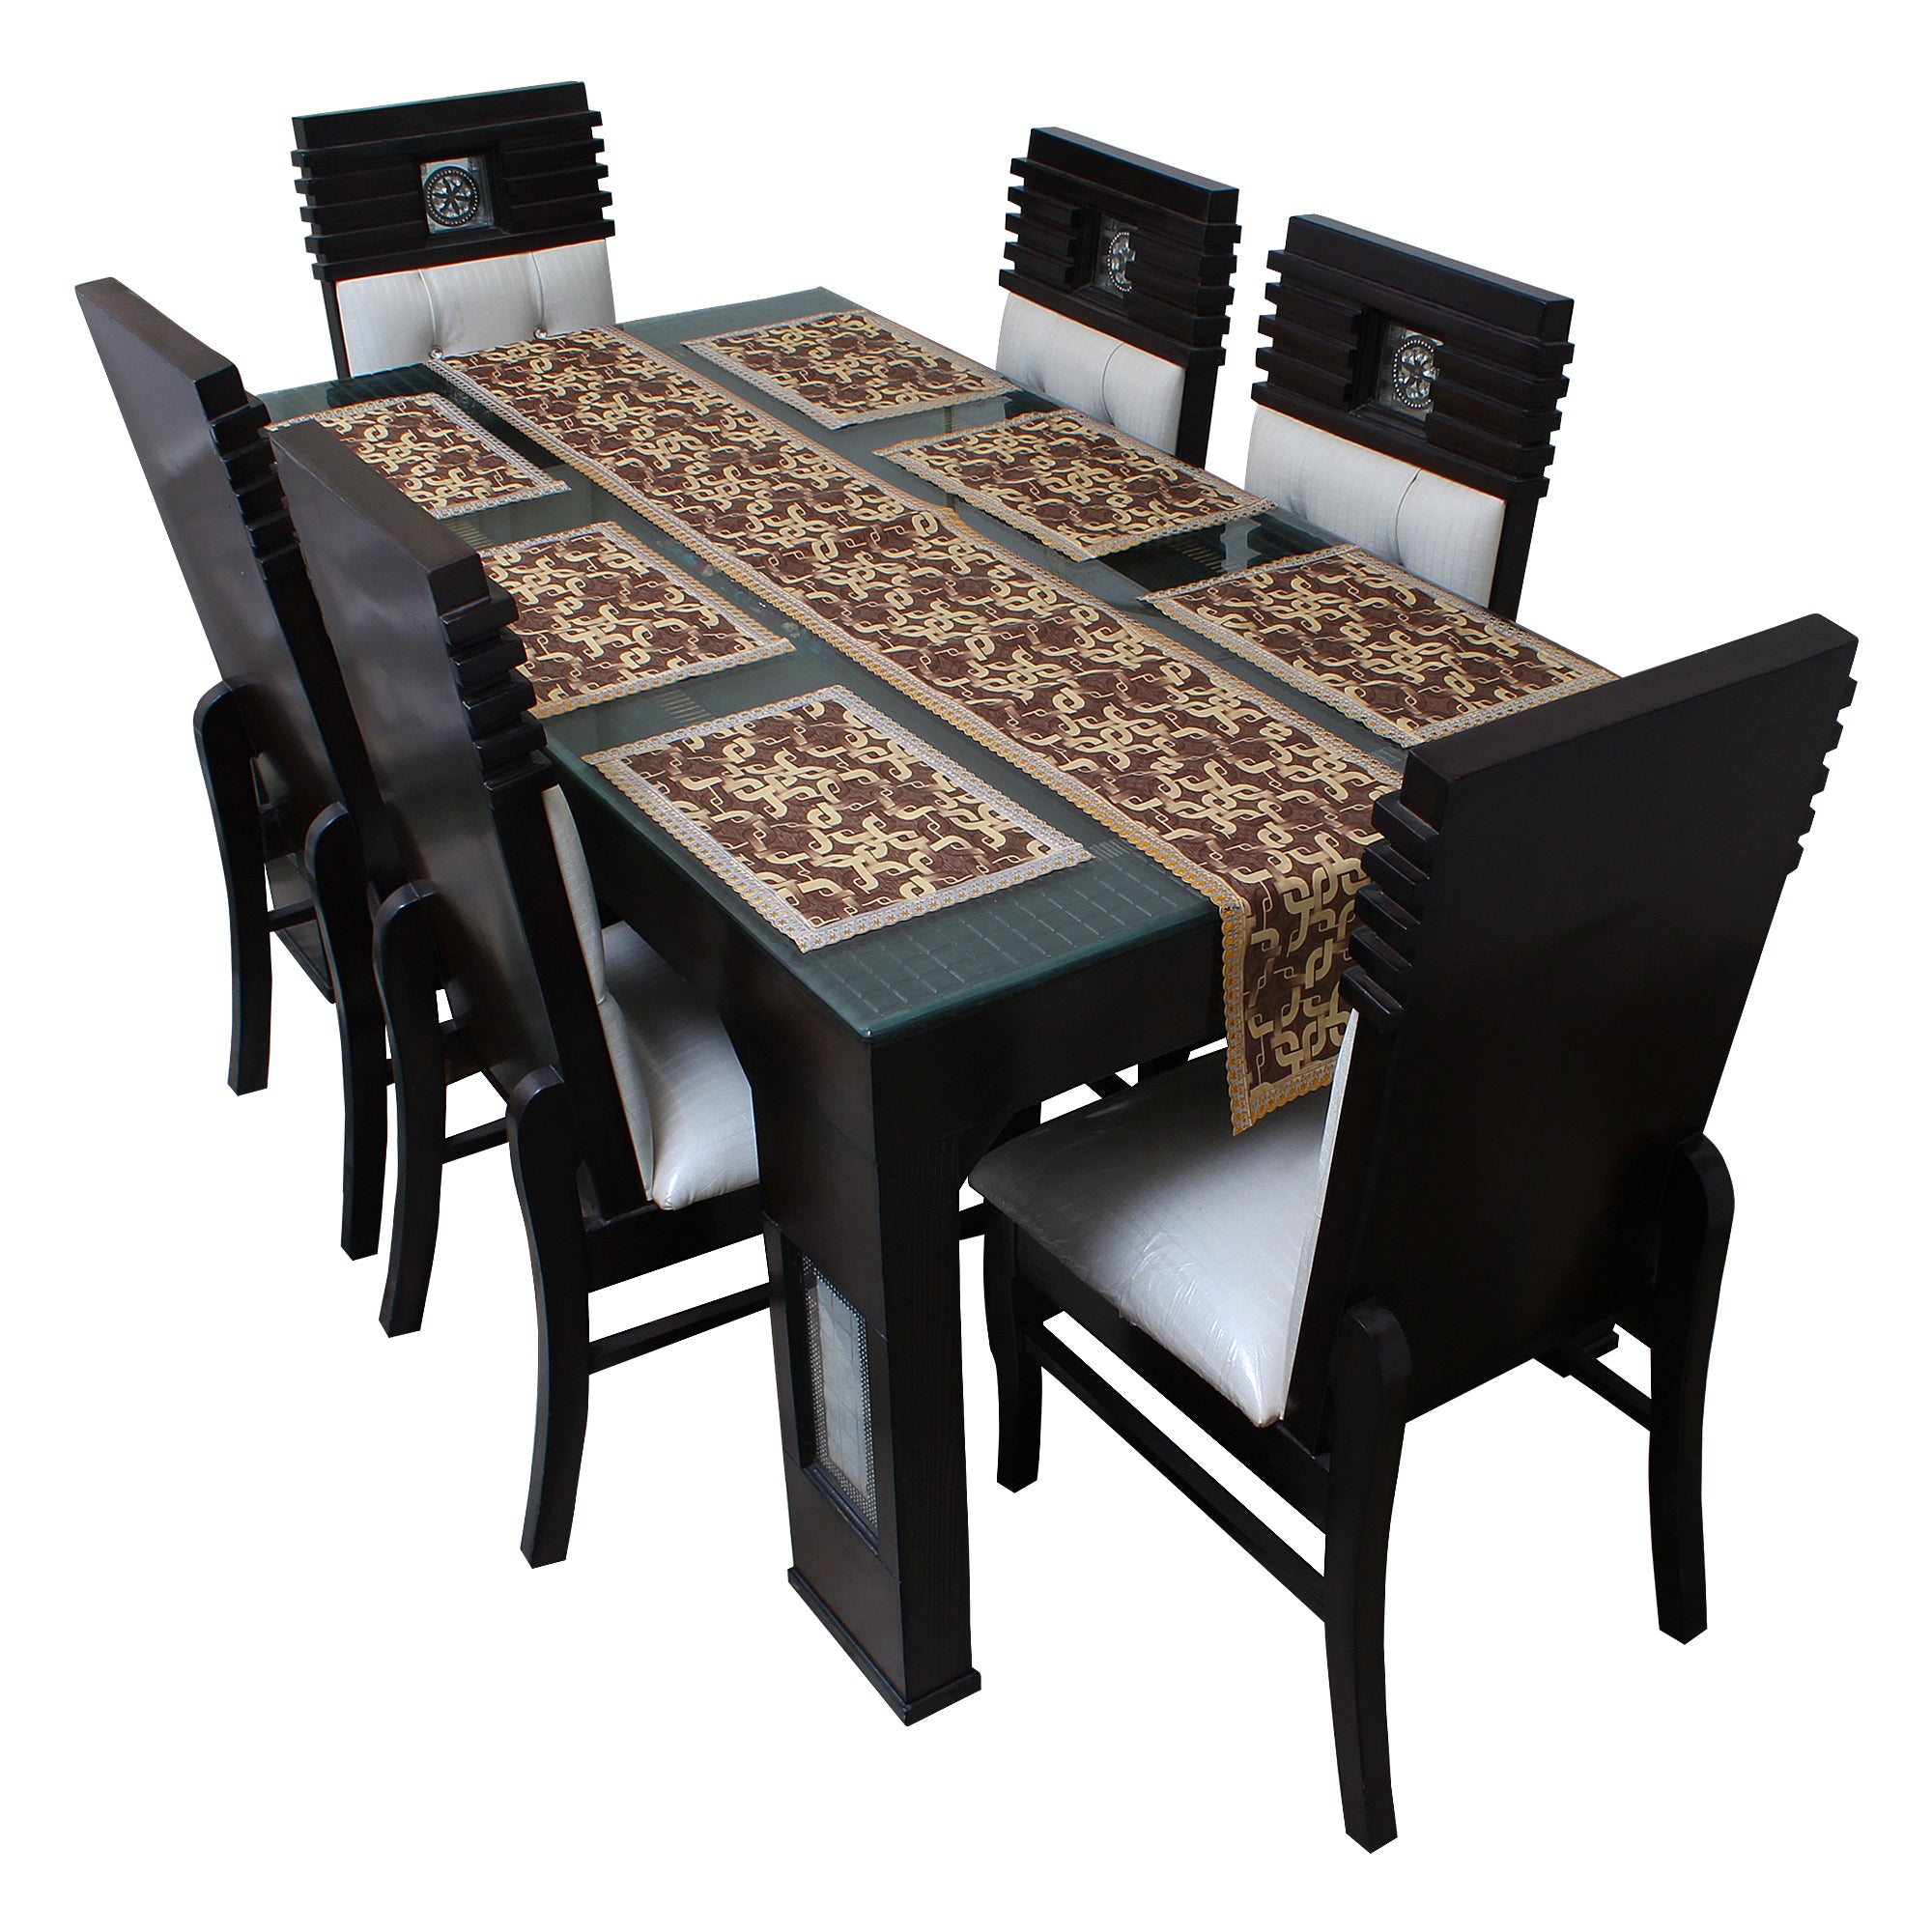 Waterproof & Dustproof Dining Table Runner With 6 Placemats, SA39 - Dream Care Furnishings Private Limited